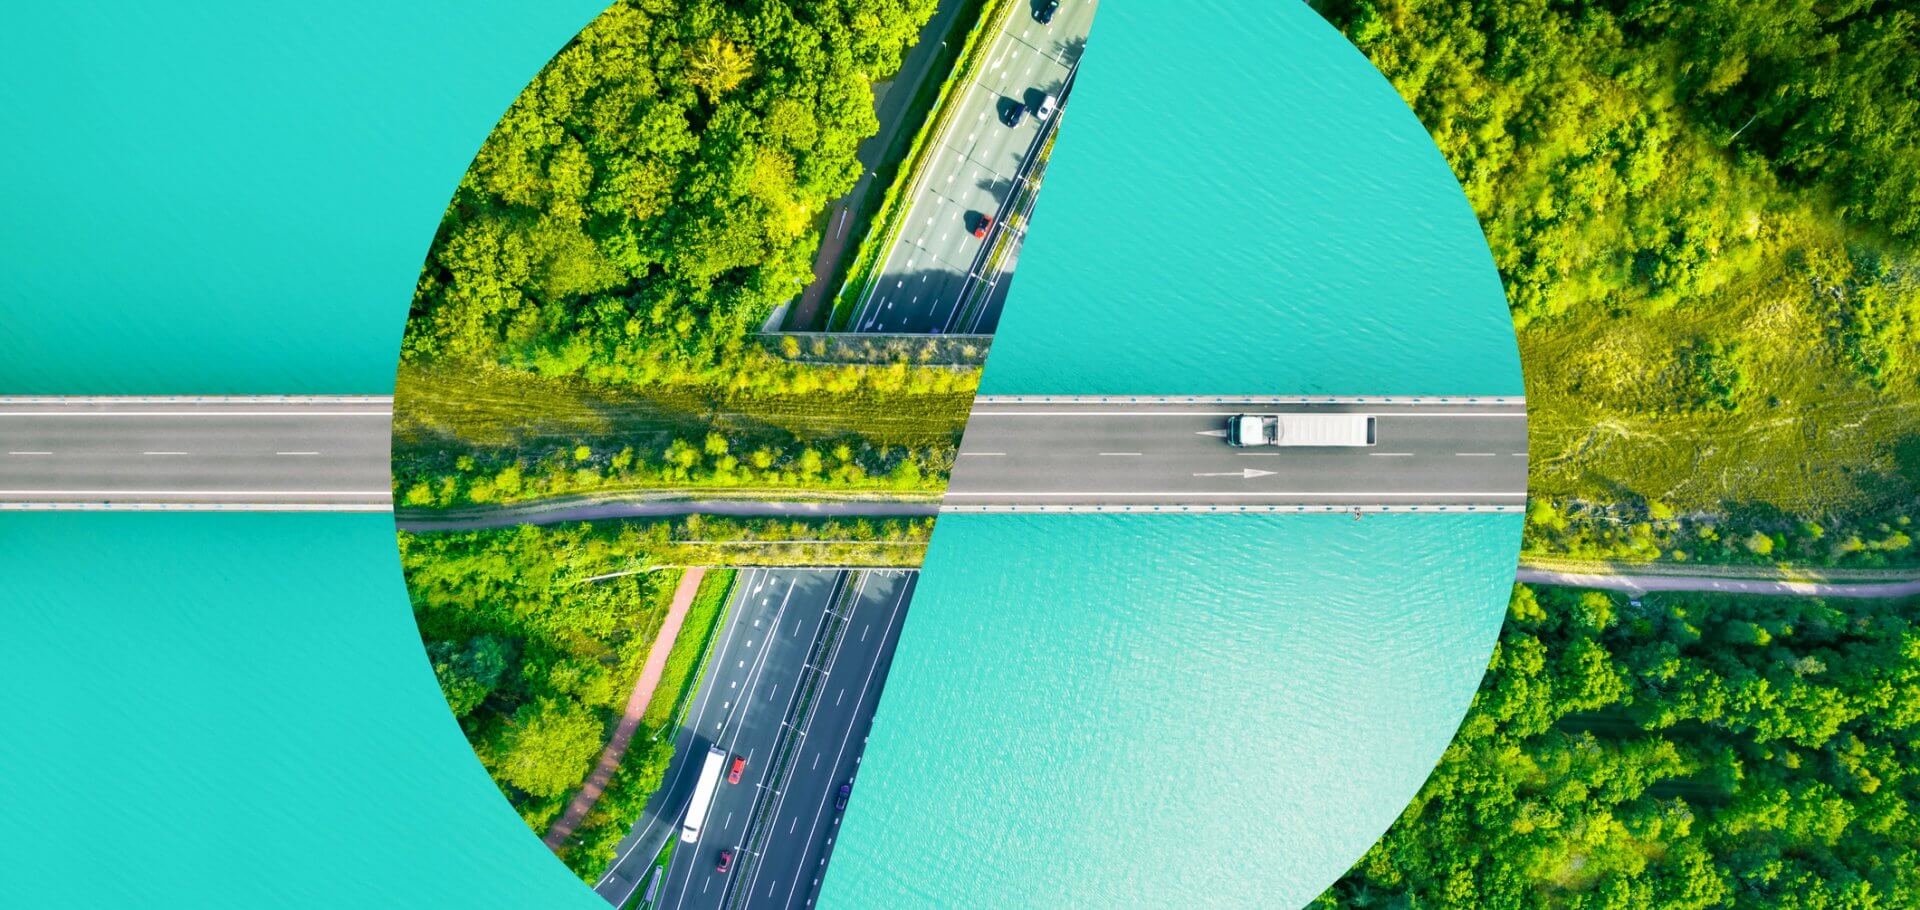 Creative picture montage with a circle shape, connecting different roads from directly above evoking sustainability.